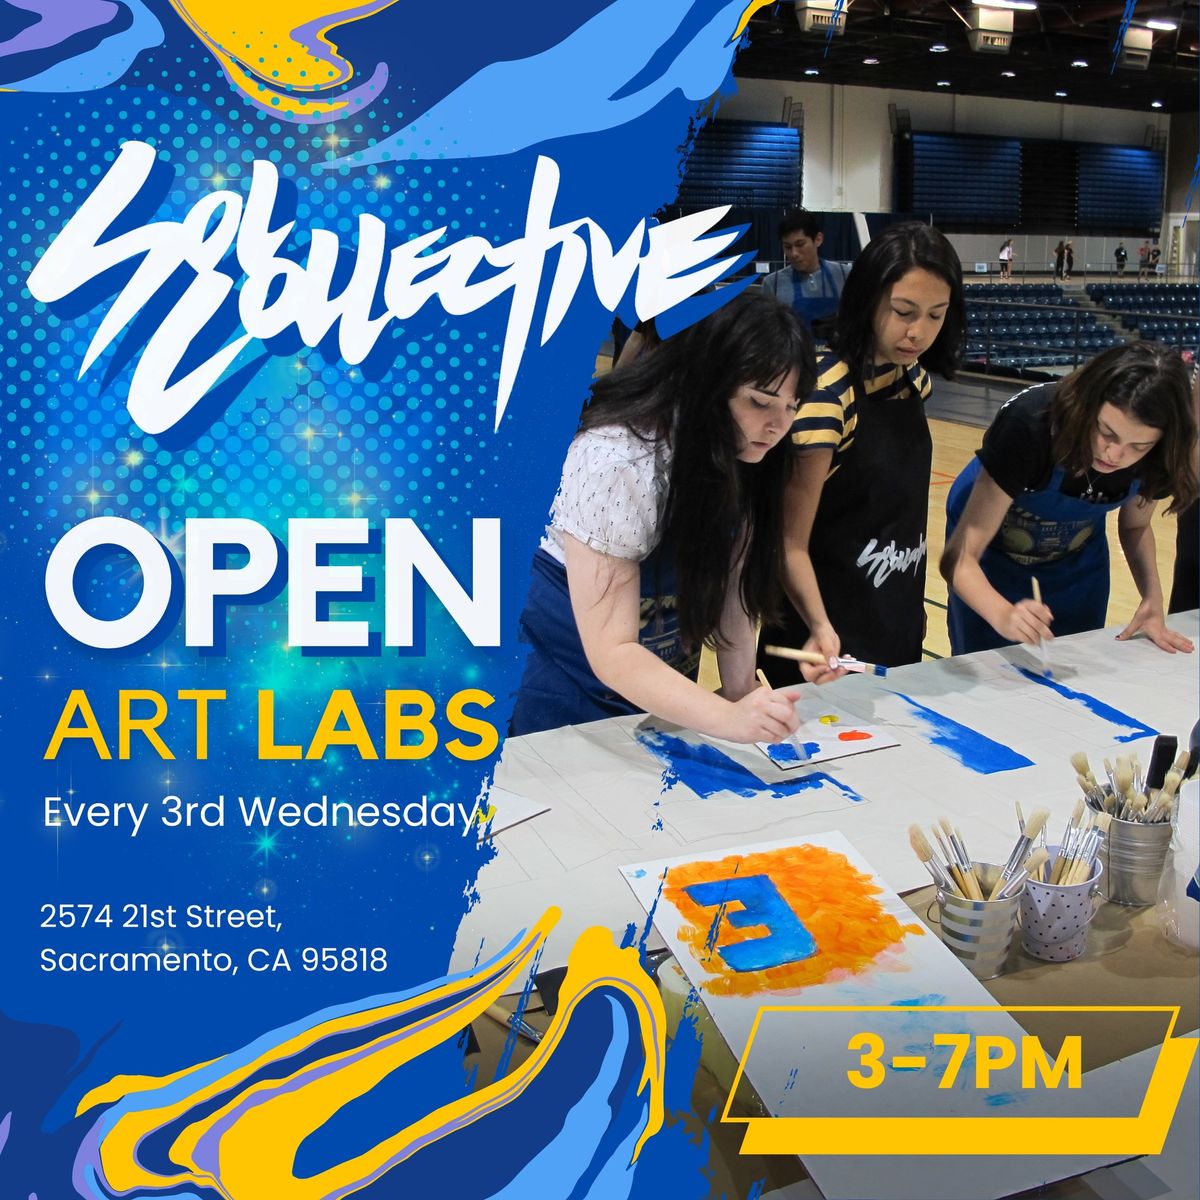 Open Art Labs at Sol Collective!